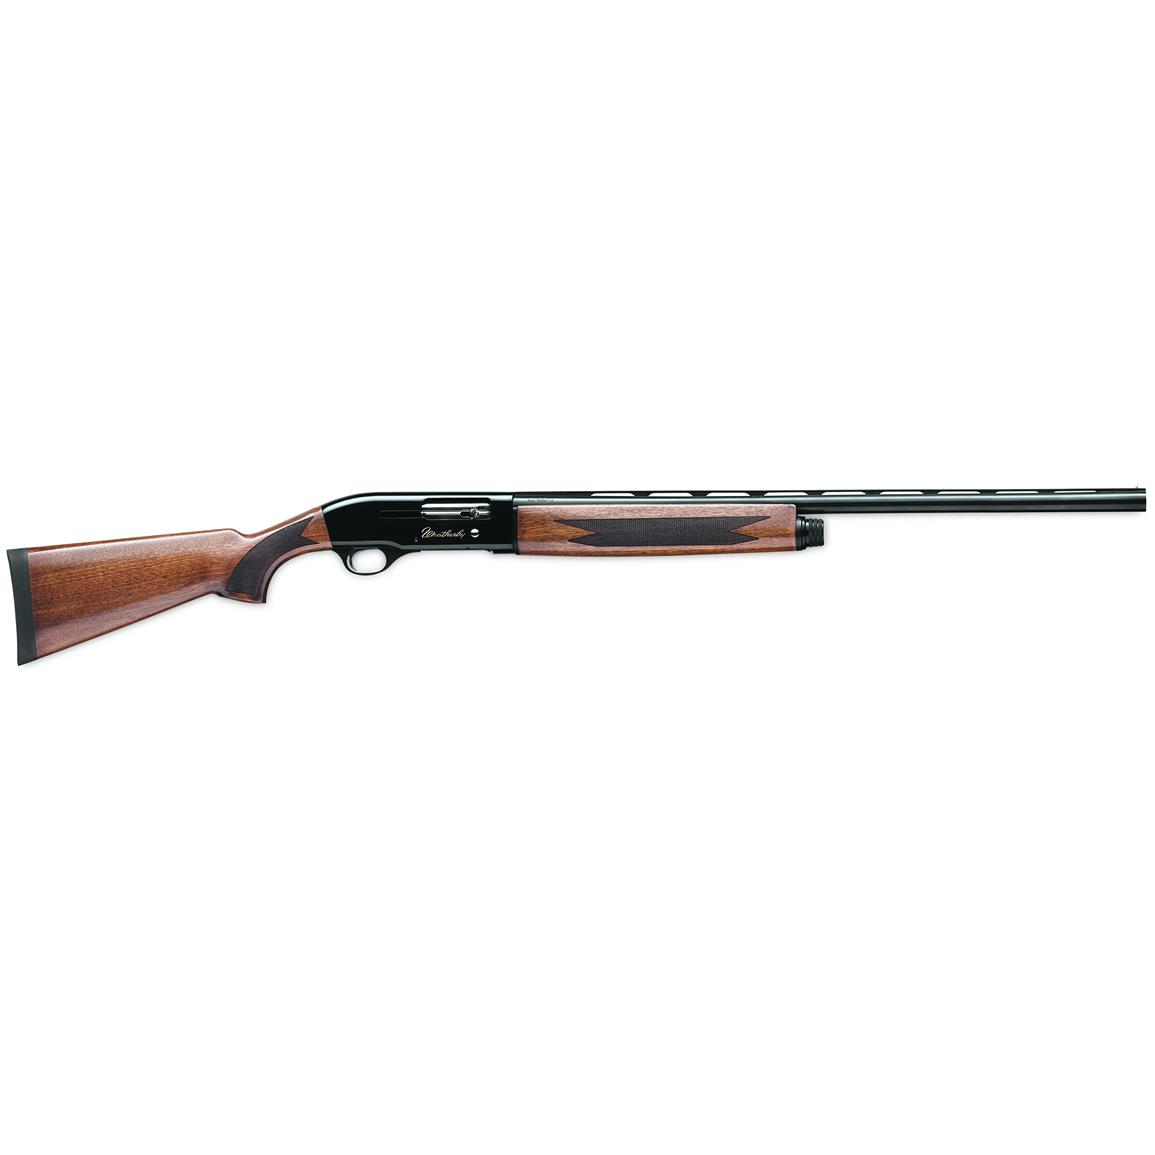 Weatherby SA-08 Deluxe, Semi-Automatic, 20 Gauge, 26" Barrel, 4+1 Rounds